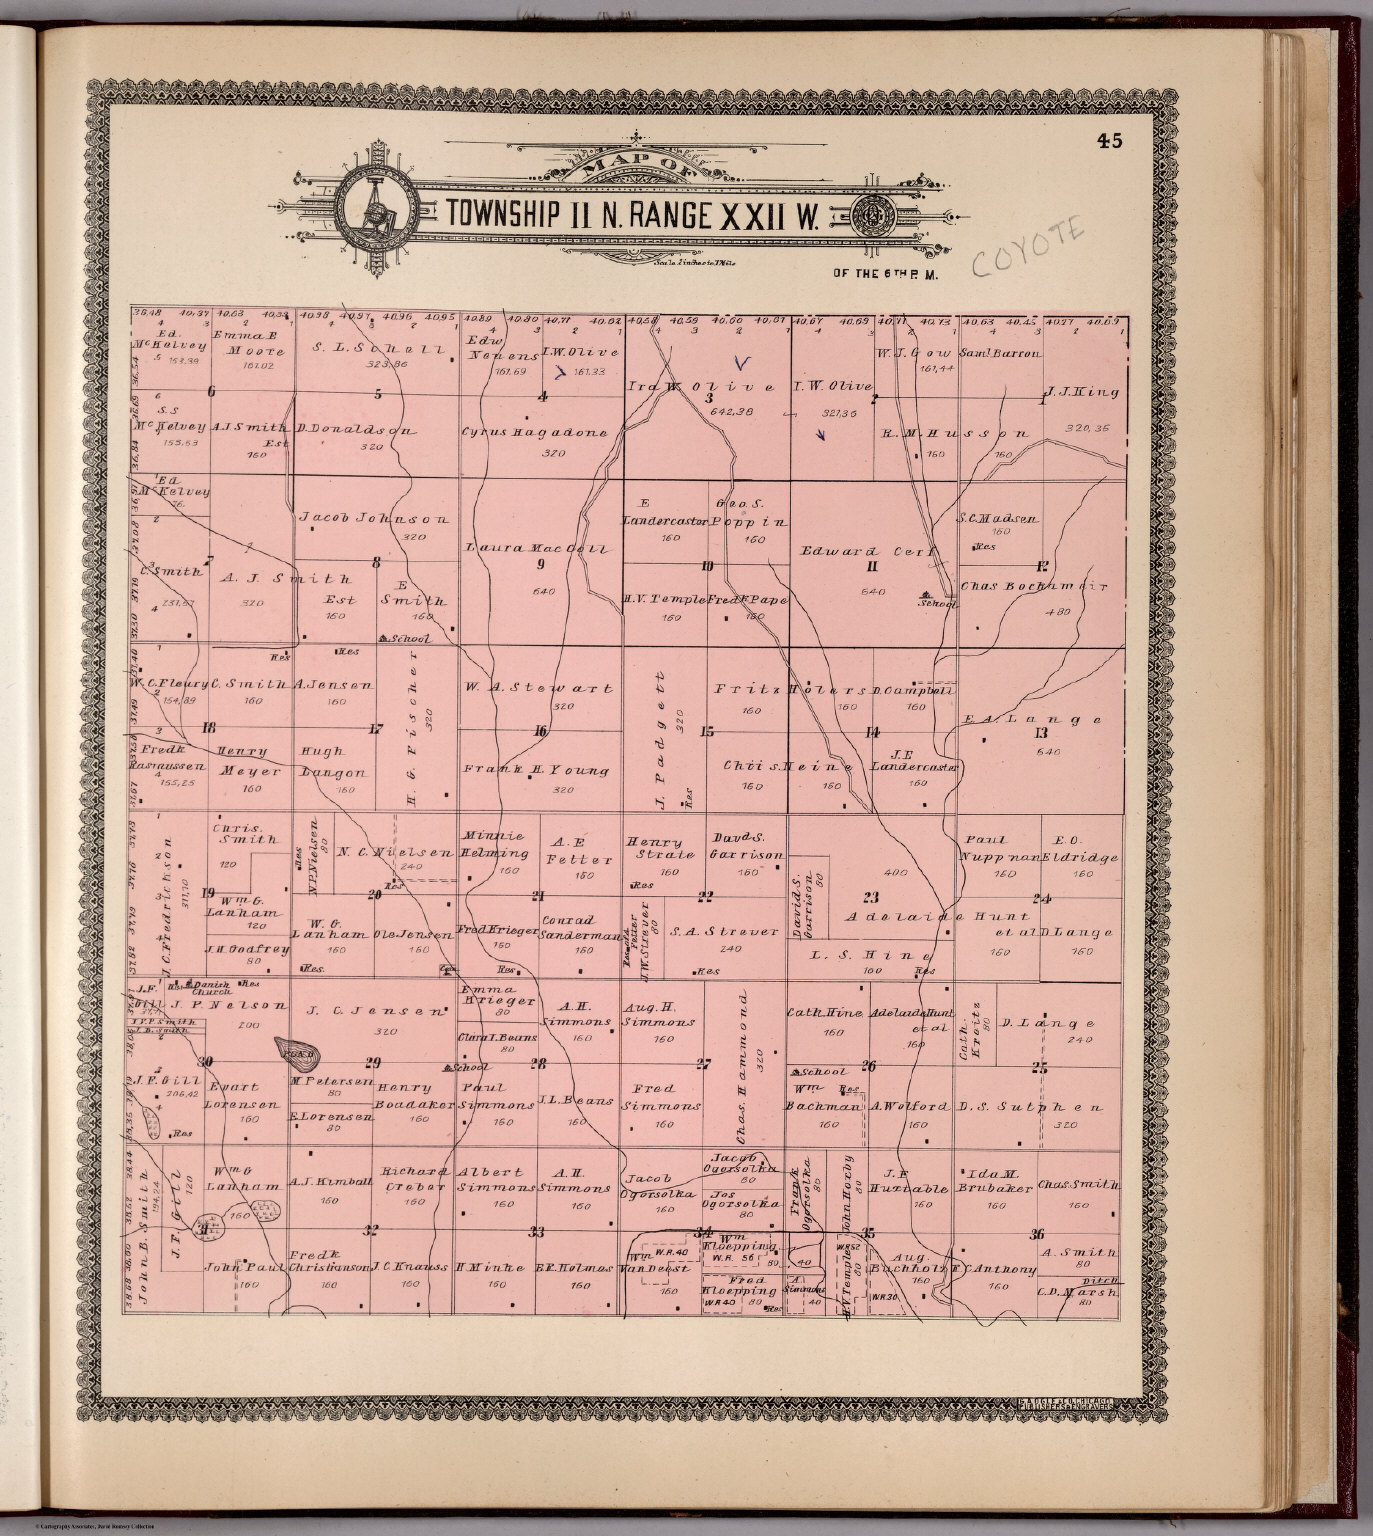 Township 11 N Range Xxii W David Rumsey Historical Map Collection 7182